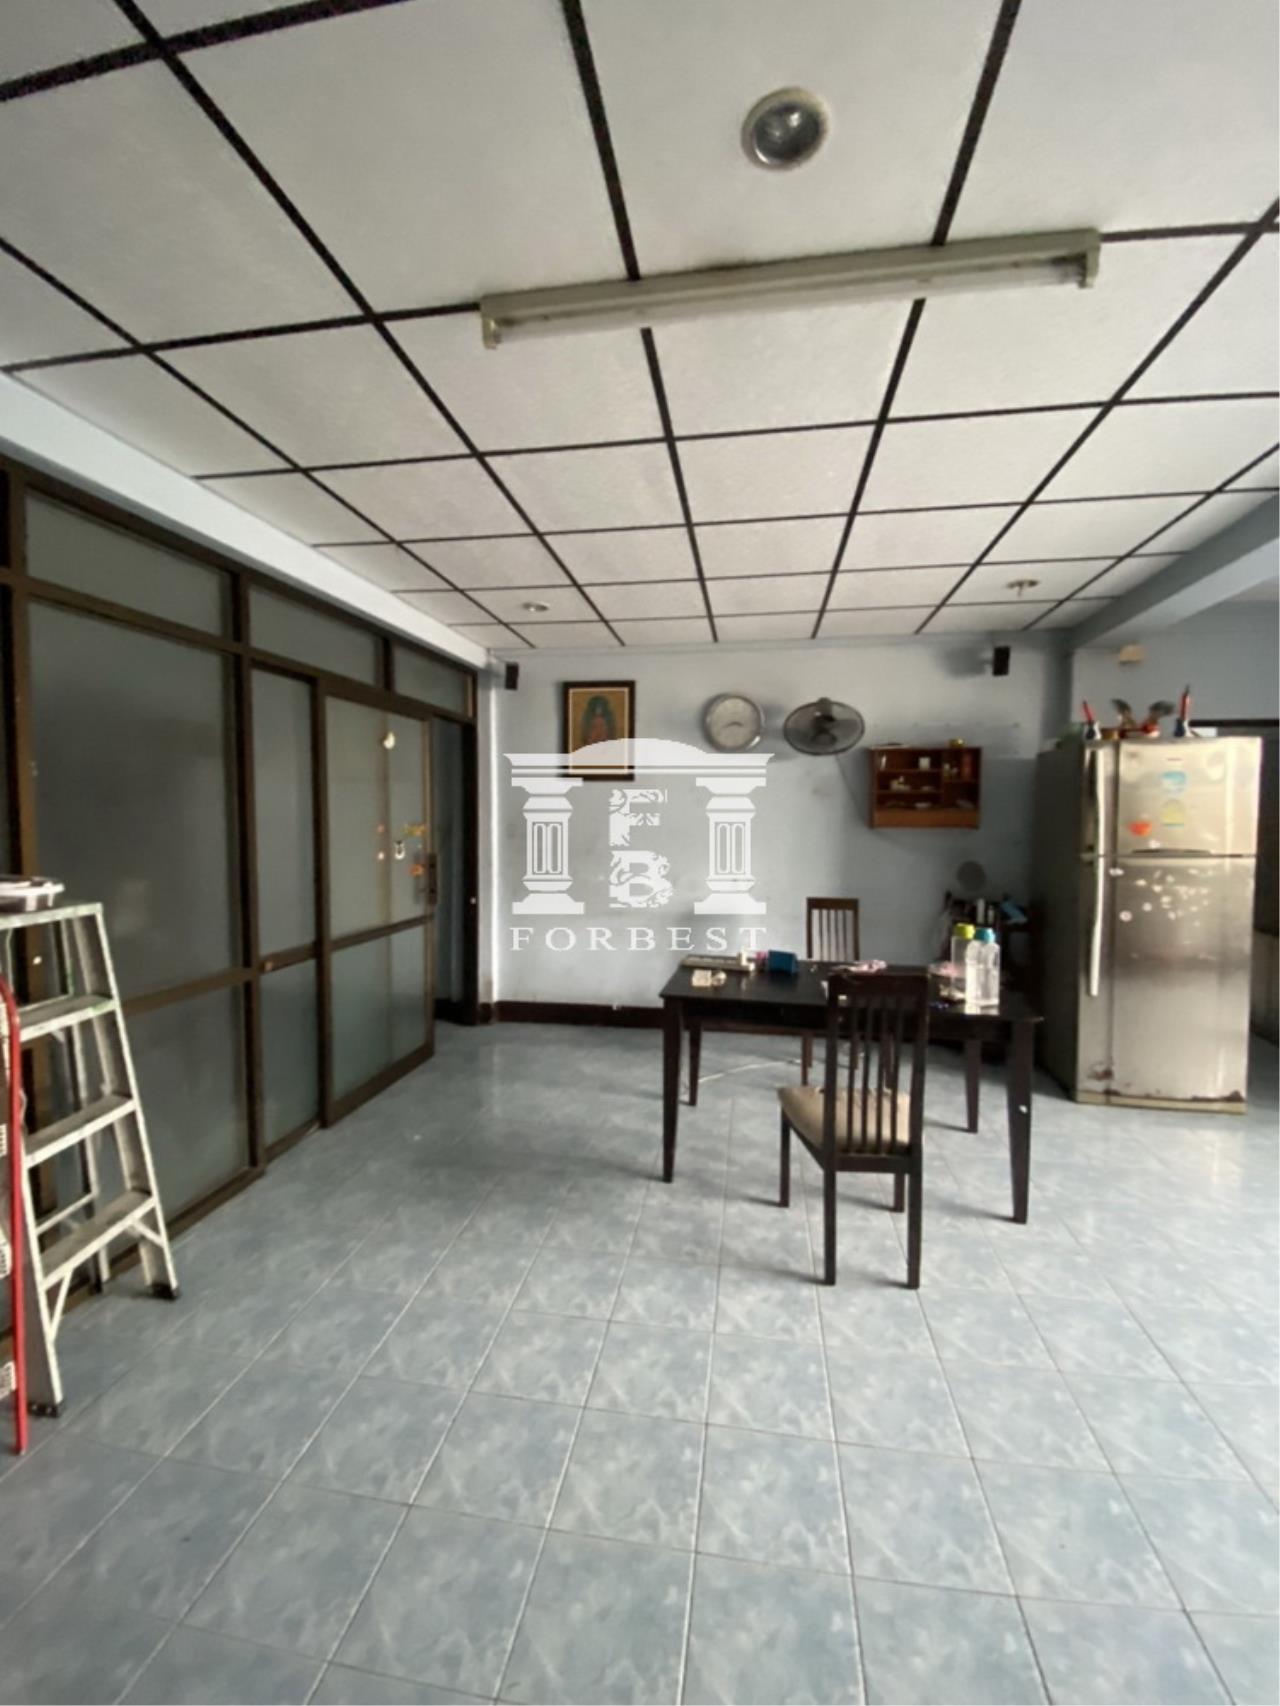 Forbest Properties Agency's 90487 - Taksin, Shophouse for sale, 3 floors, 2 booths, area 184 Sq.m. 5